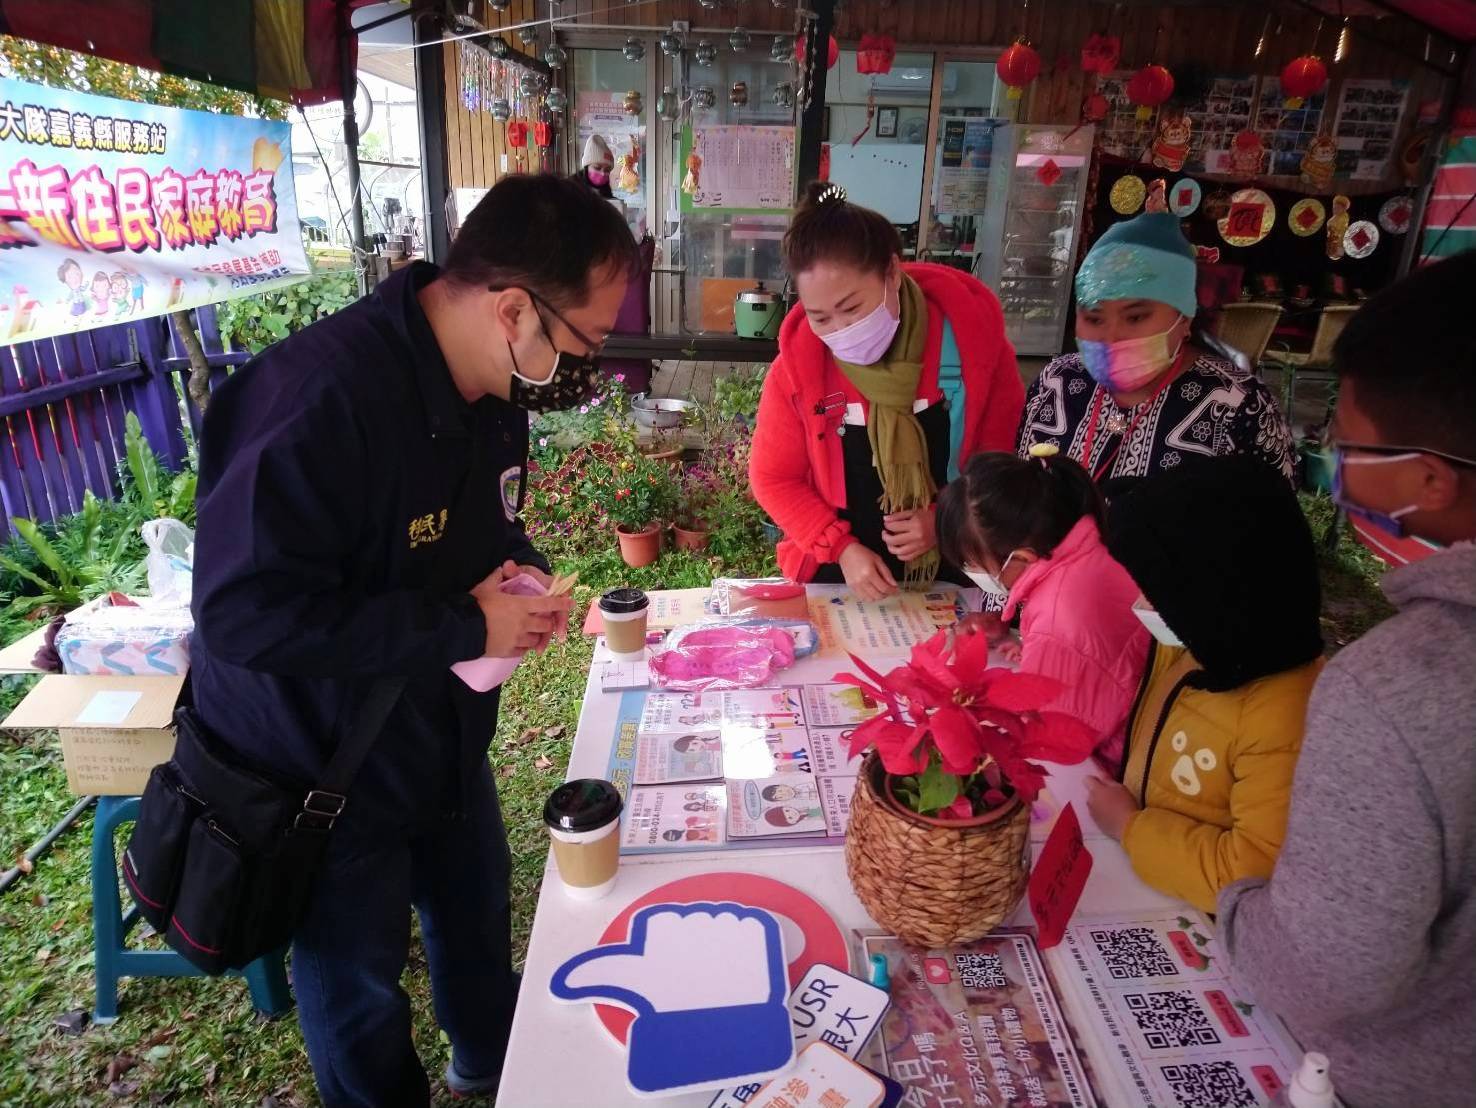 Personnel of Chiayi County Service Station share relevant information to immigrants and their children. (Photo / Provided by Chiayi County Service Station)